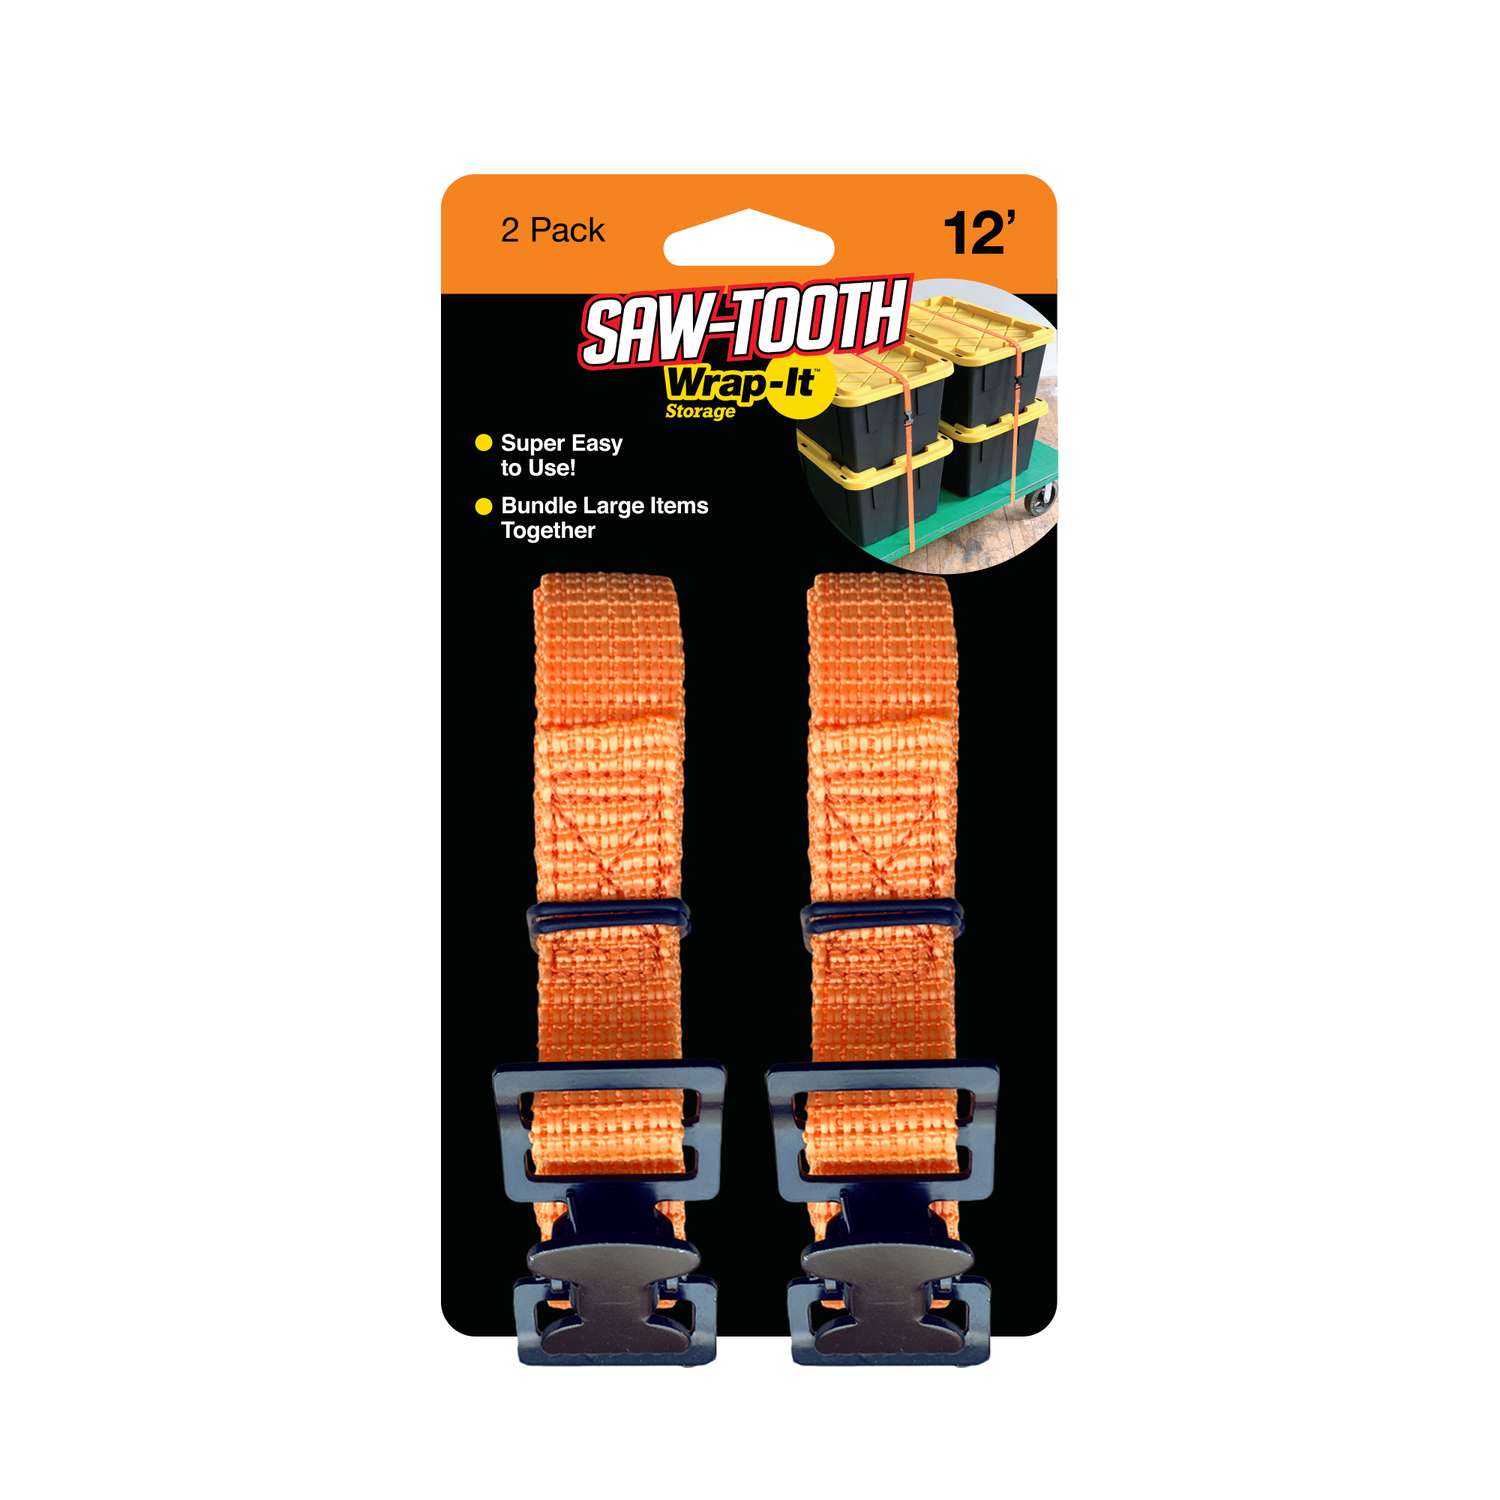 Quick and Easy to Use U... Wrap-It Storage Saw-Tooth Strap 12 ft Orange 6 Pack 